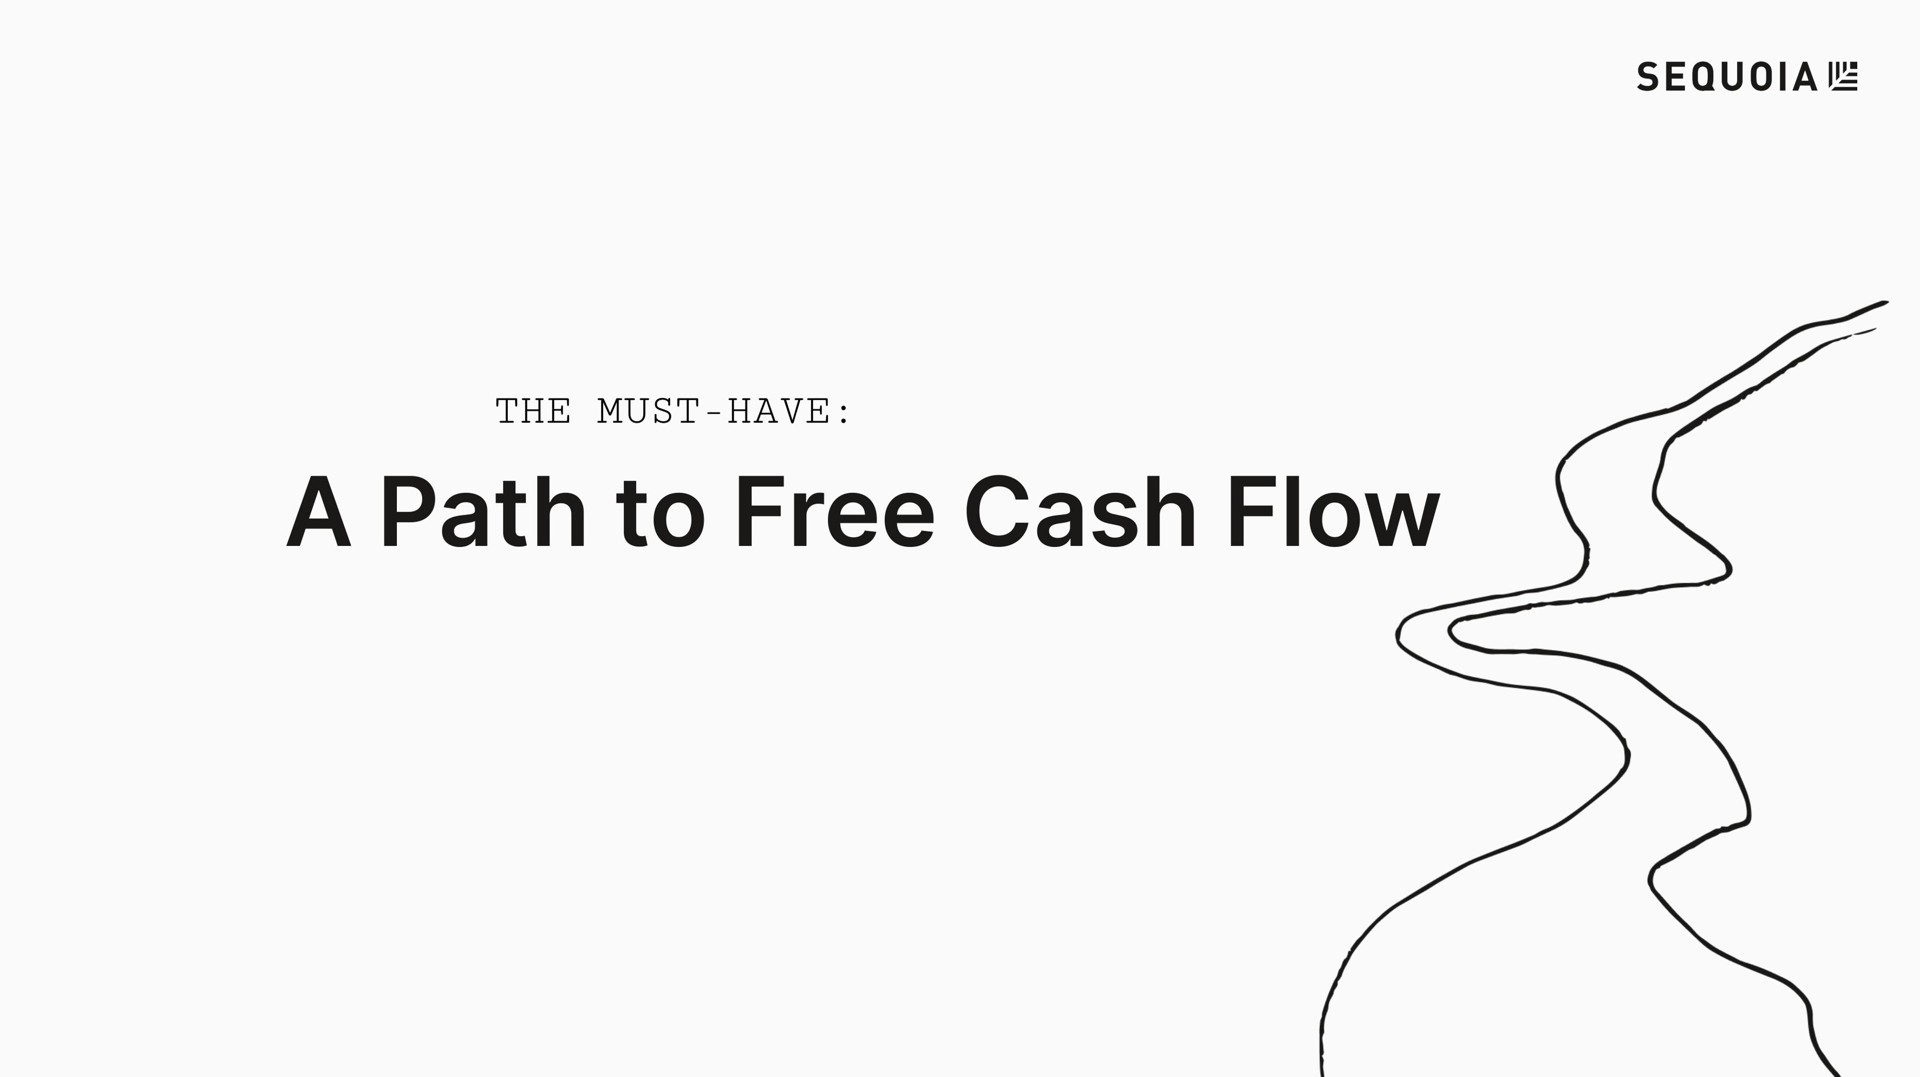 a path to free cash flow | Sequoia Capital